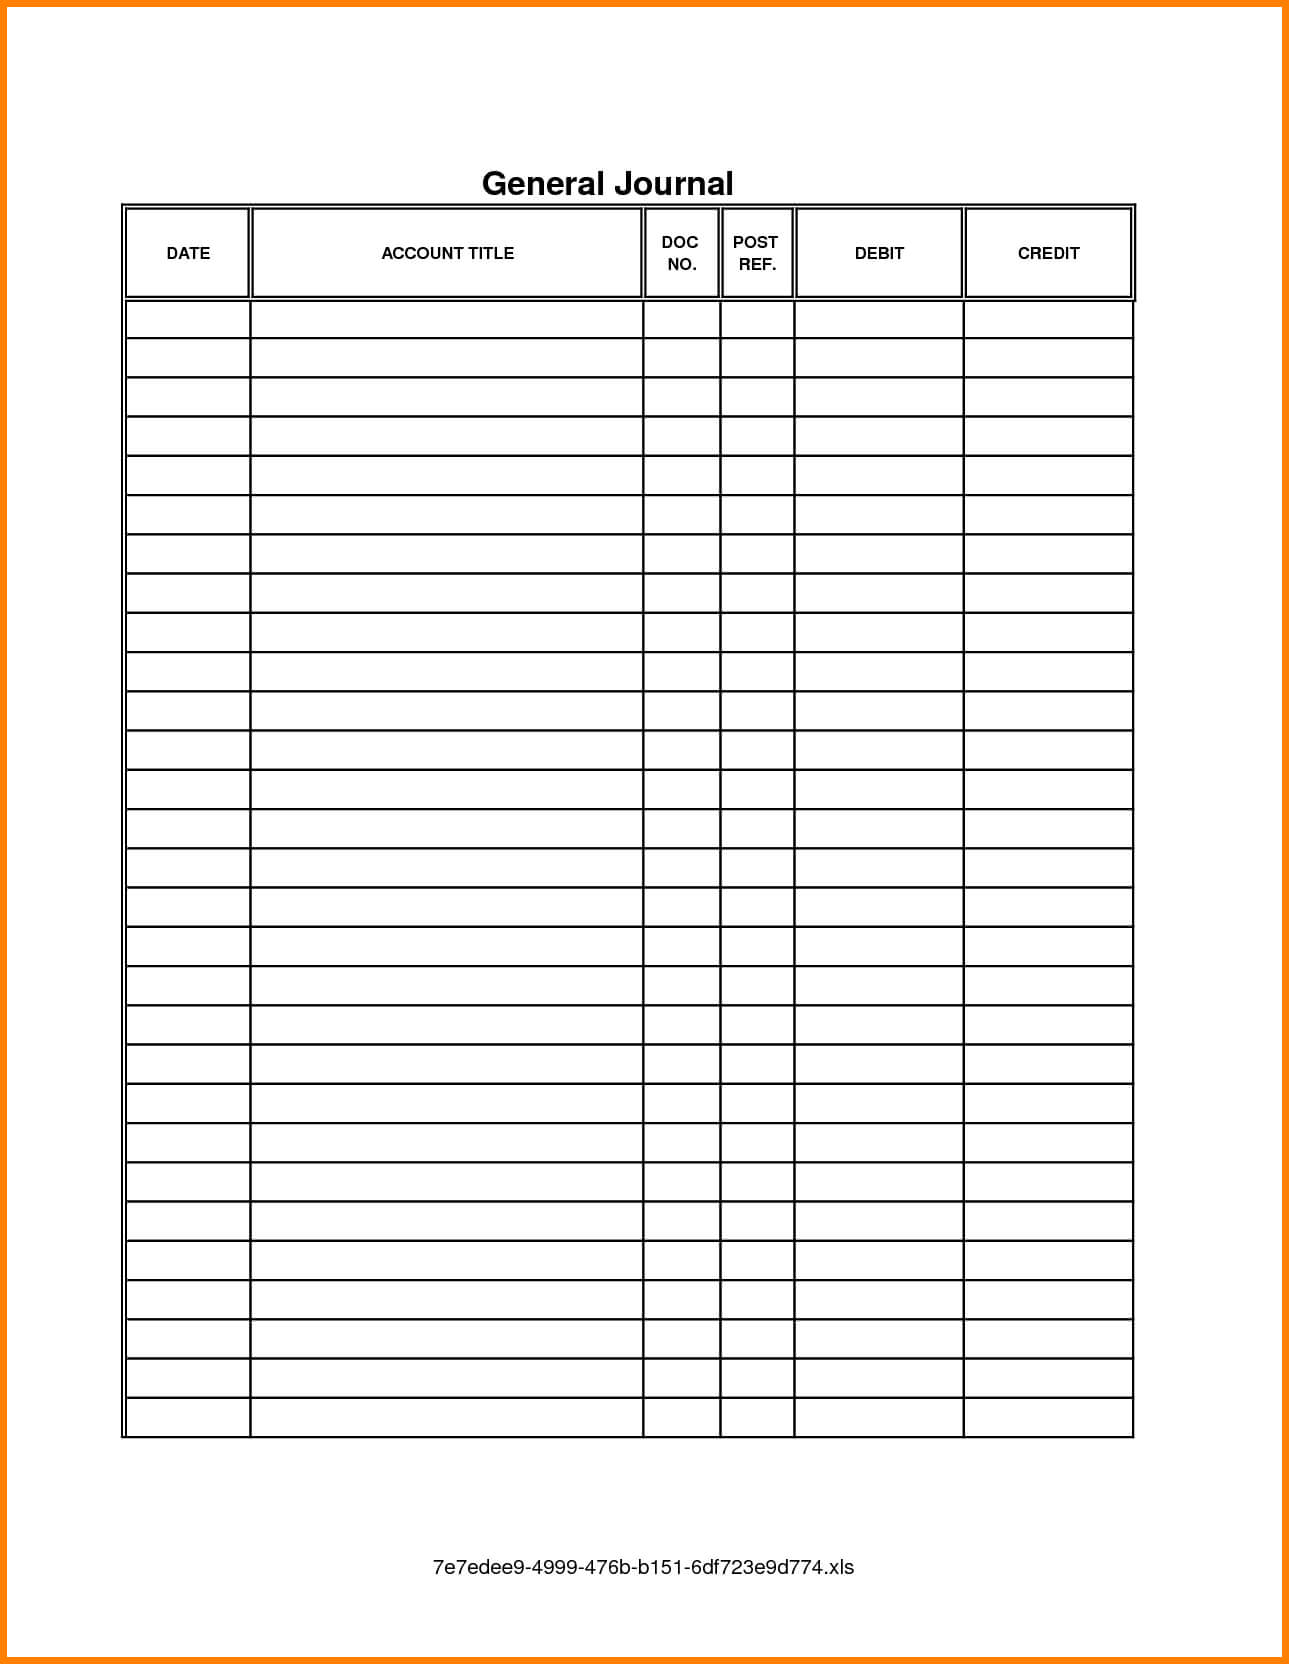 012 Template Ideas General Journal Ledger Accounting Throughout Double Entry Journal Template For Word